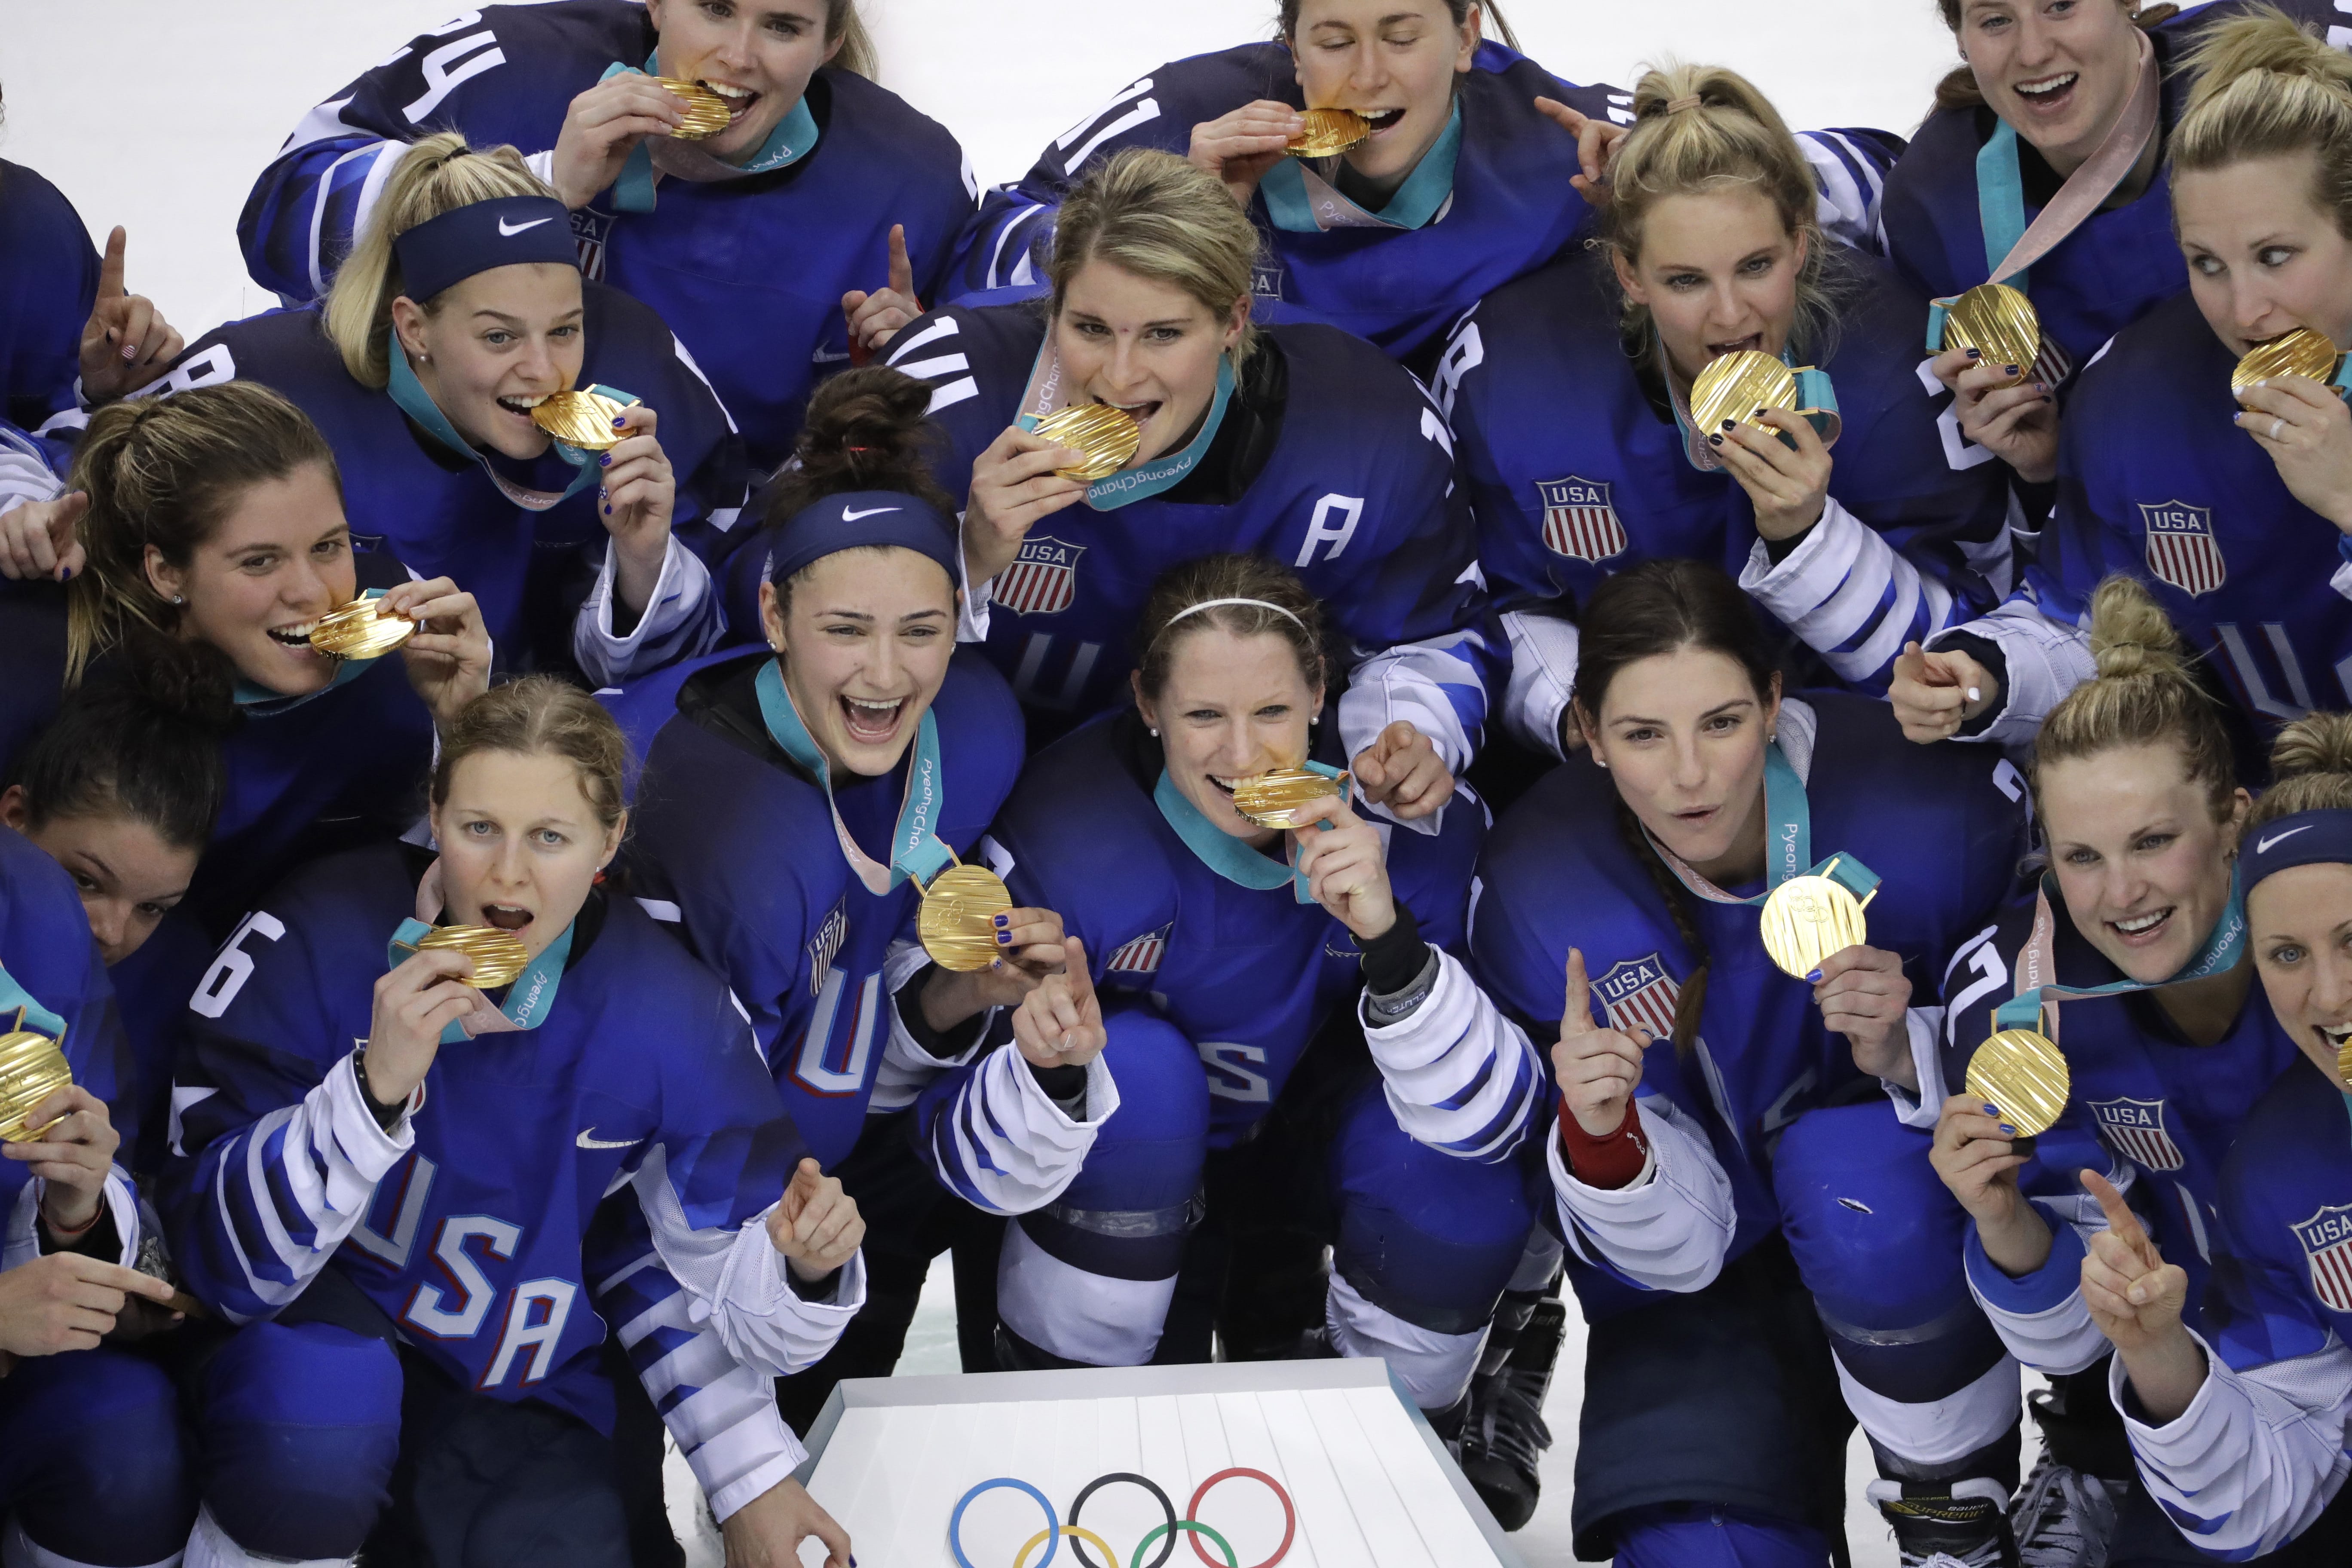 Untied States hockey team celebrate with their gold medals after beating Canada in the women's gold medal hockey game at the 2018 Winter Olympics in Gangneung, South Korea, Thursday, Feb. 22, 2018.